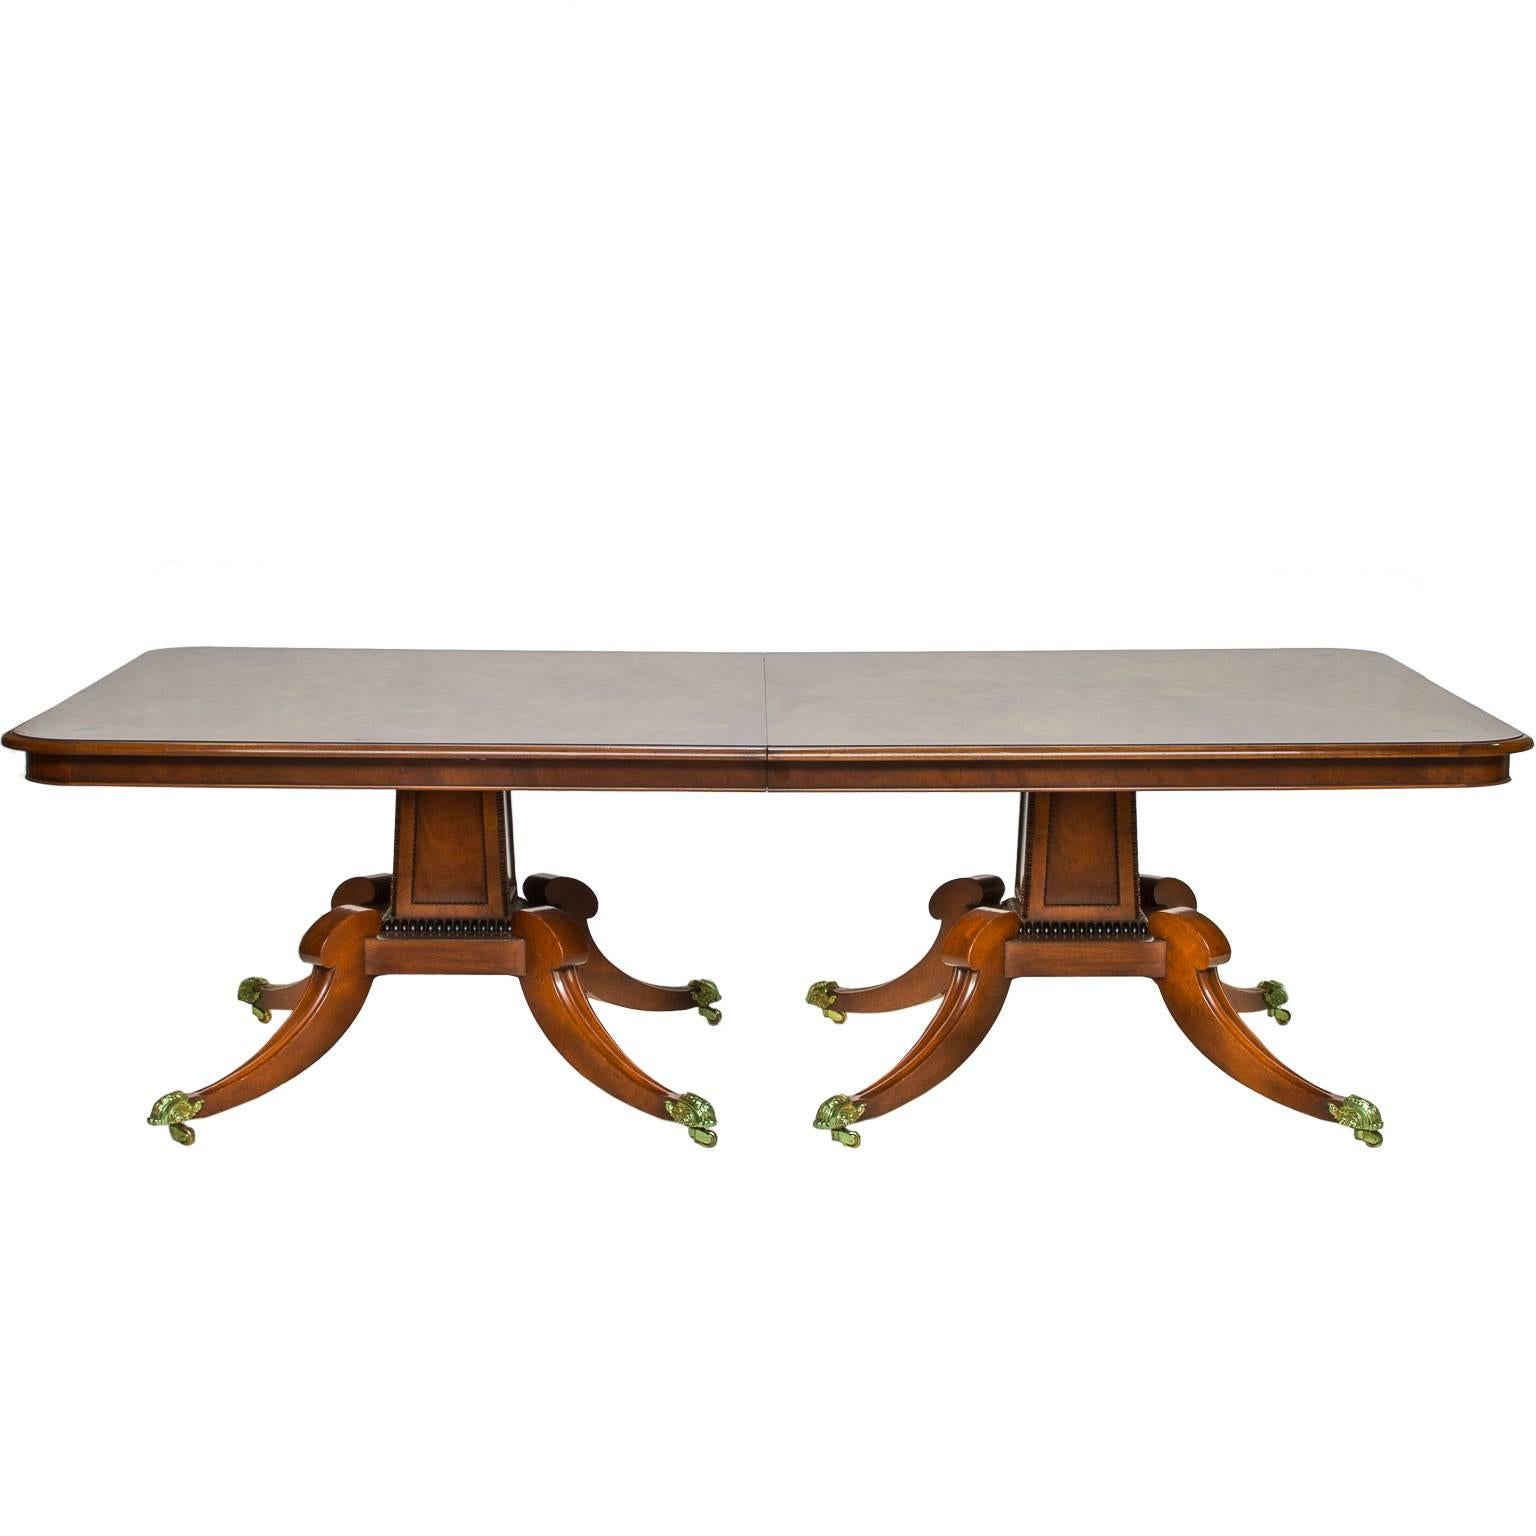 An English mahogany two pedestal, two-leaf dining table in the Regency style. This table has a beautiful top. Choice cuts of mahogany with multiple color tones. Nice figuring to the grain. A string inlaid of ebony. A bullnose edging and apron below.